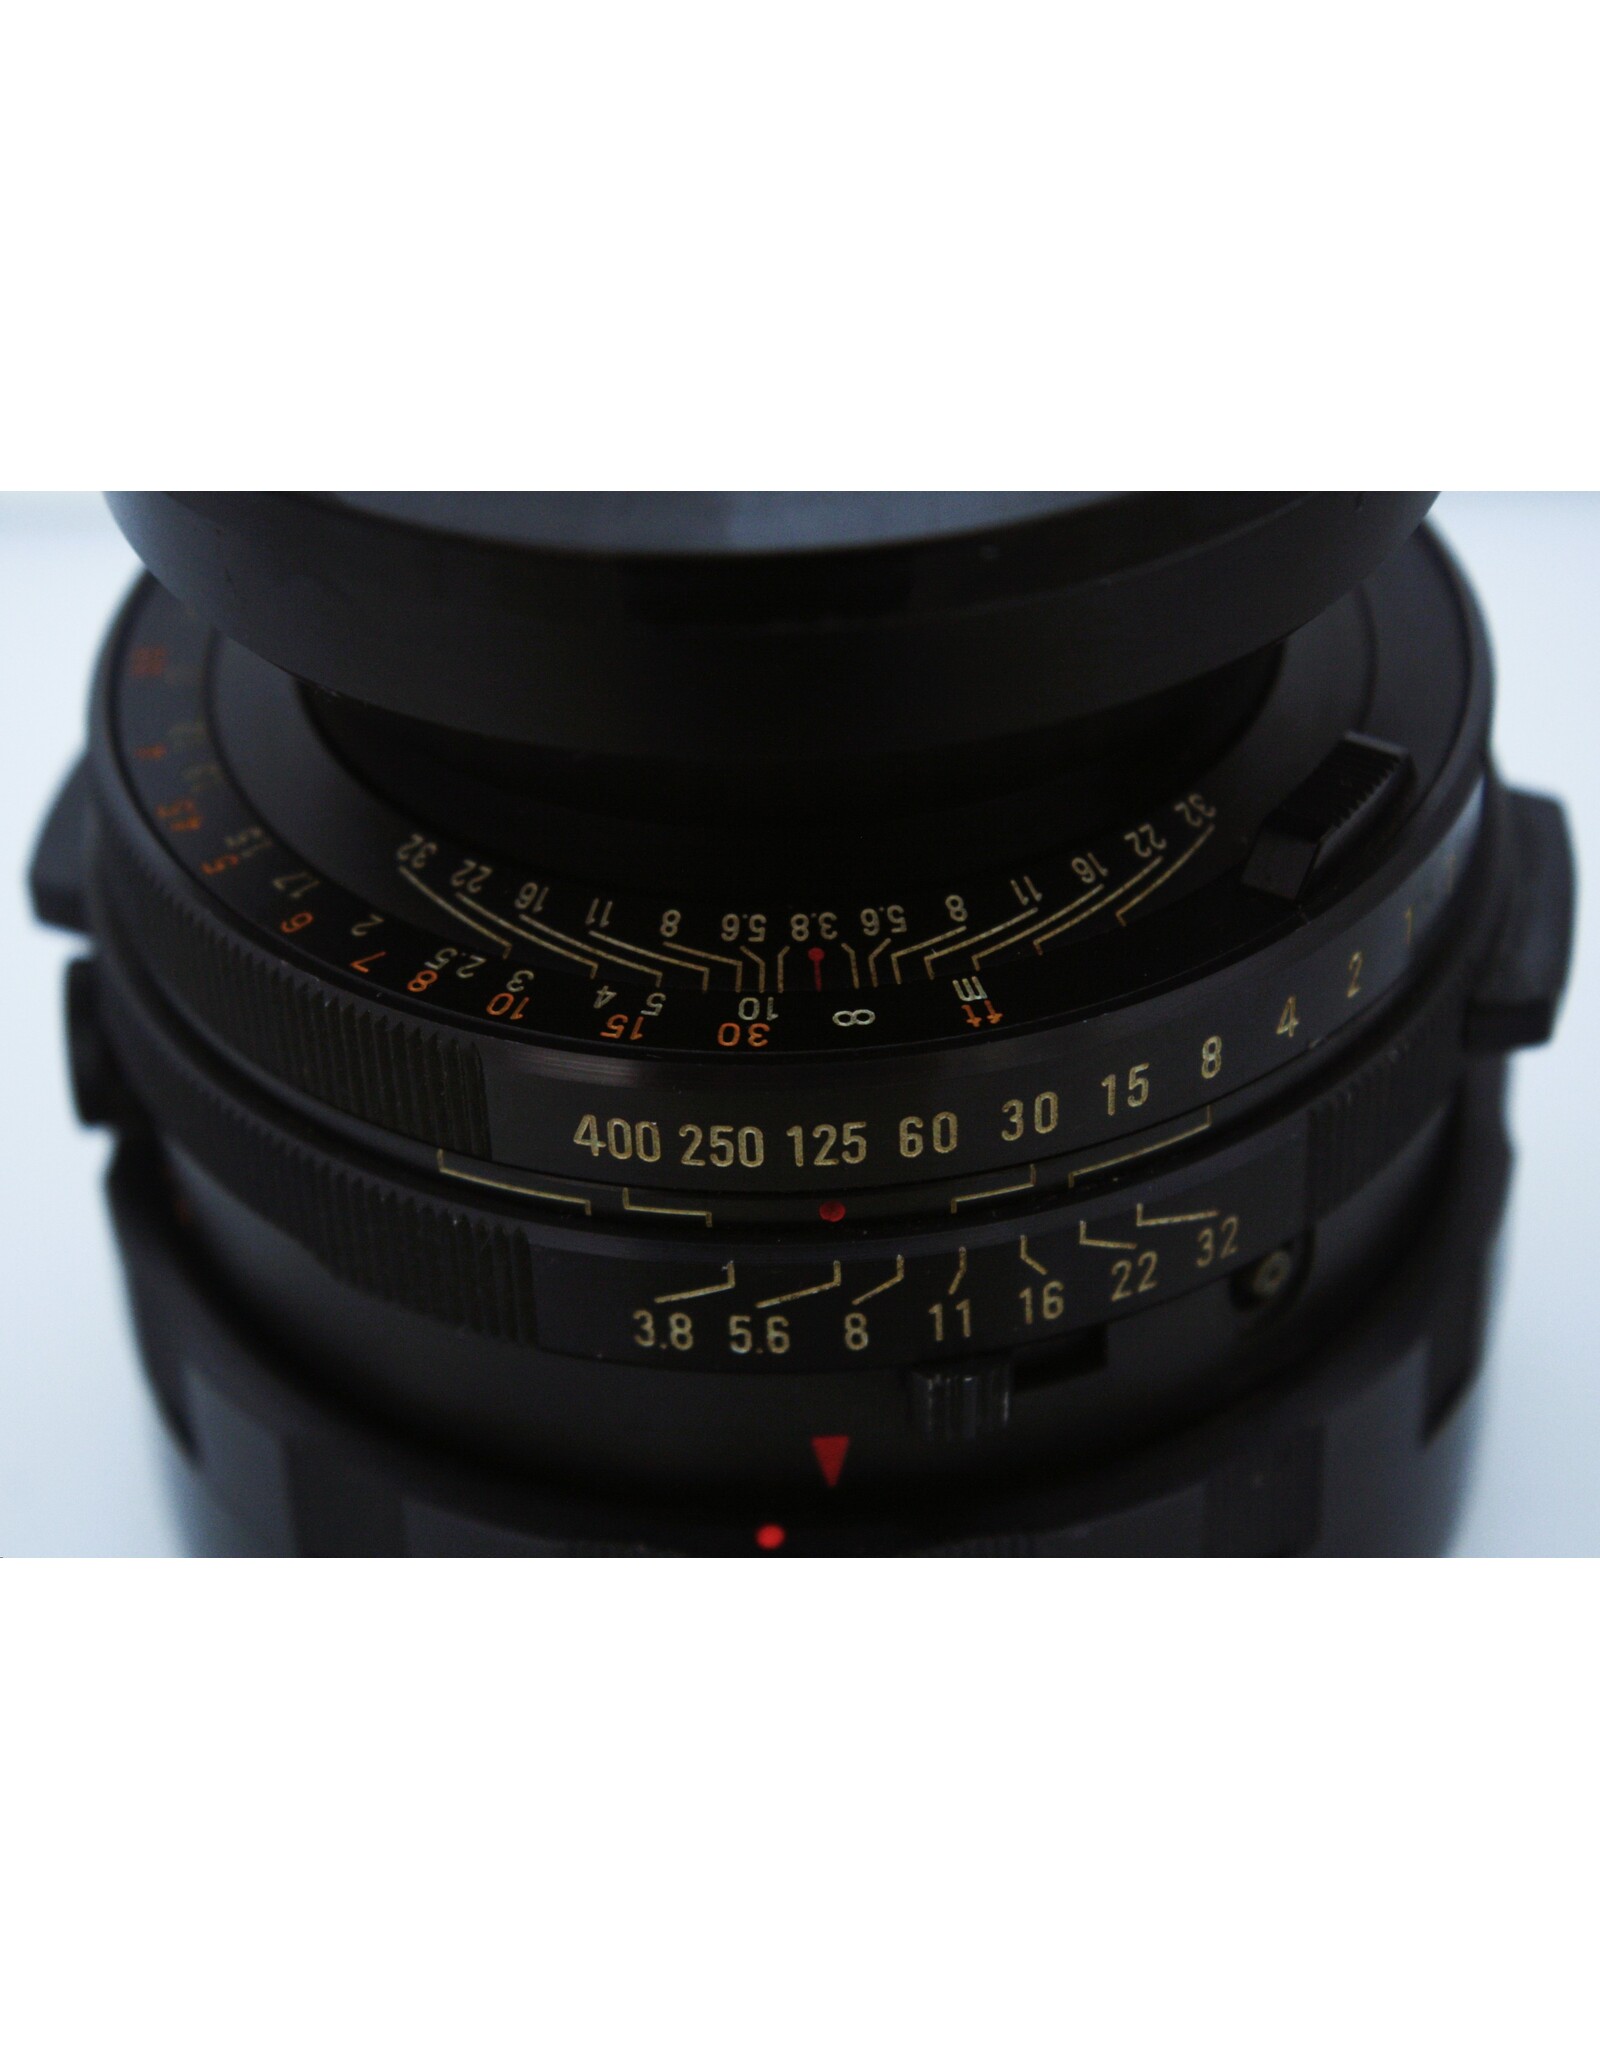 Mamiya Sekor 90mm f3.8 Lens For RB67 Pro S SD JAPAN SN 45212 (Pre-owned)